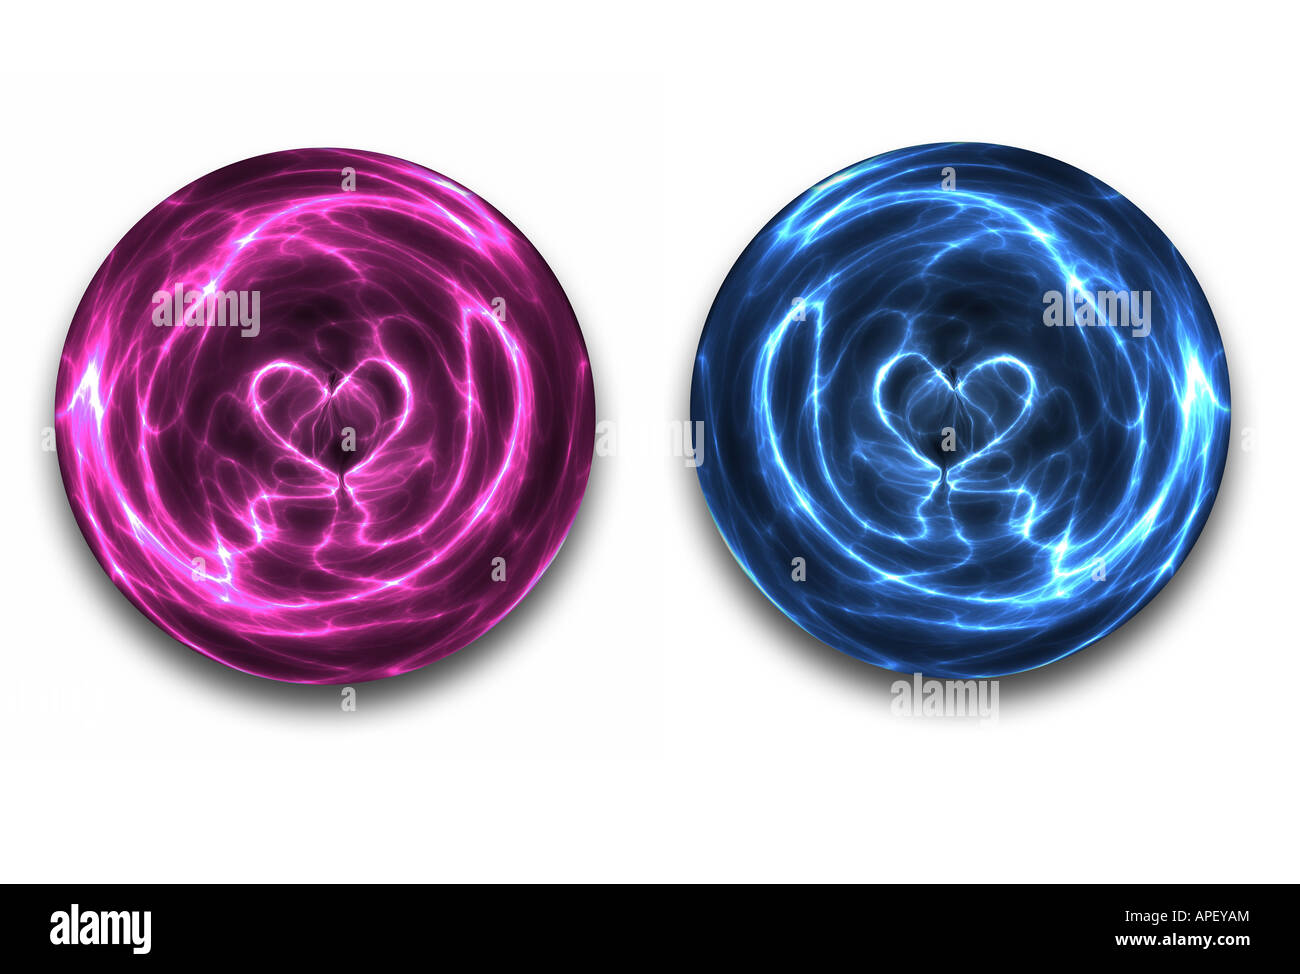 two crystal balls show hearts together Stock Photo